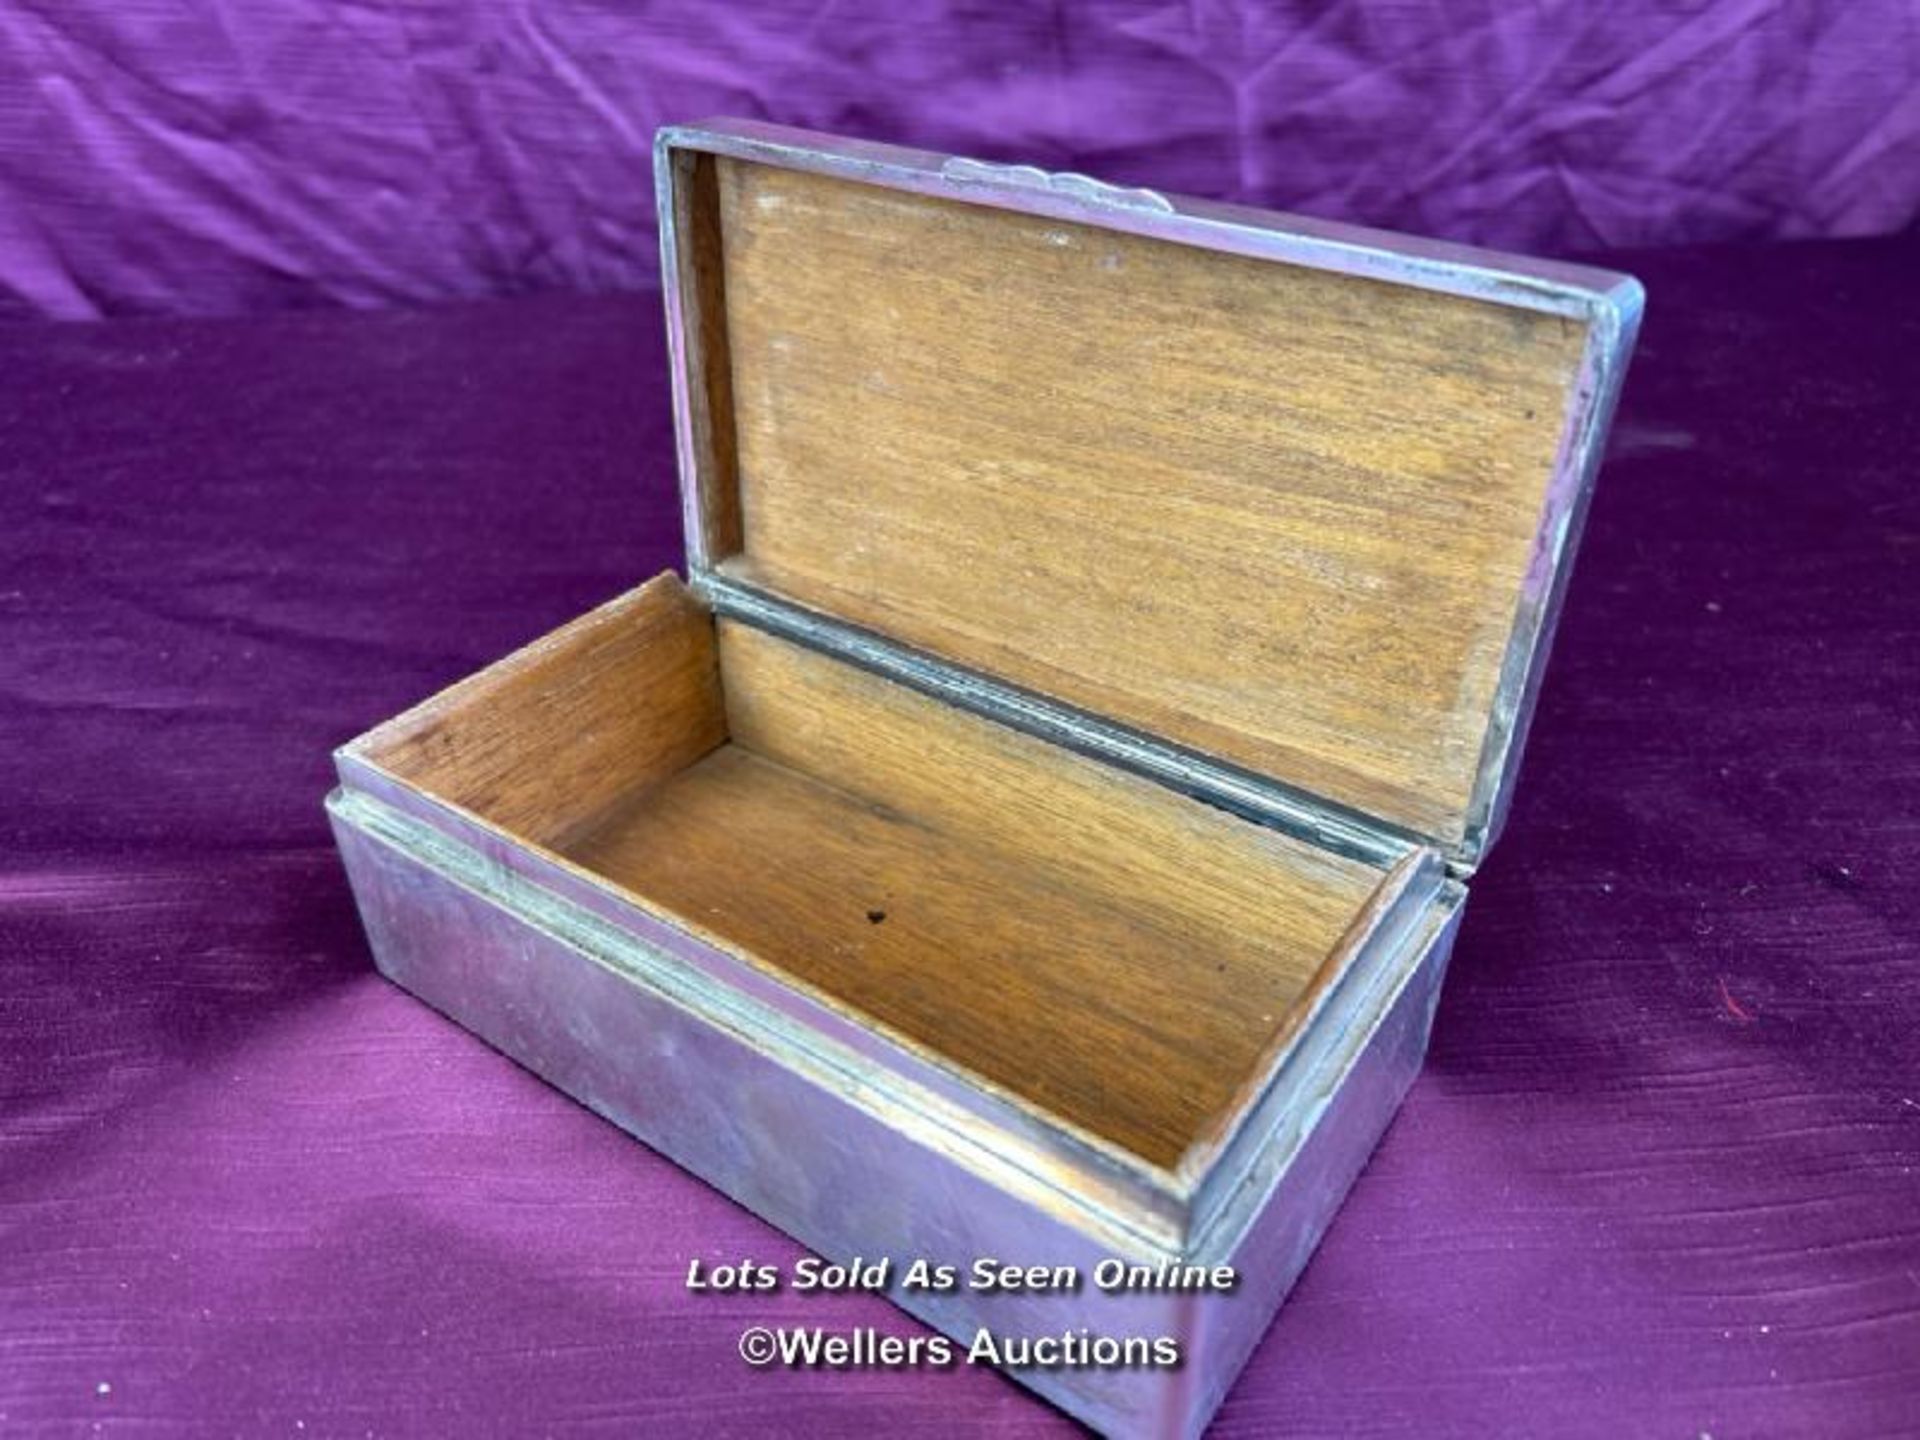 WHITE METAL AND WOODEN TRINKET BOX WITH INSCRIPTION 'FROM QUEENIE TO JO', DATED 13/04/48, 16.5 X 9 X - Bild 2 aus 4